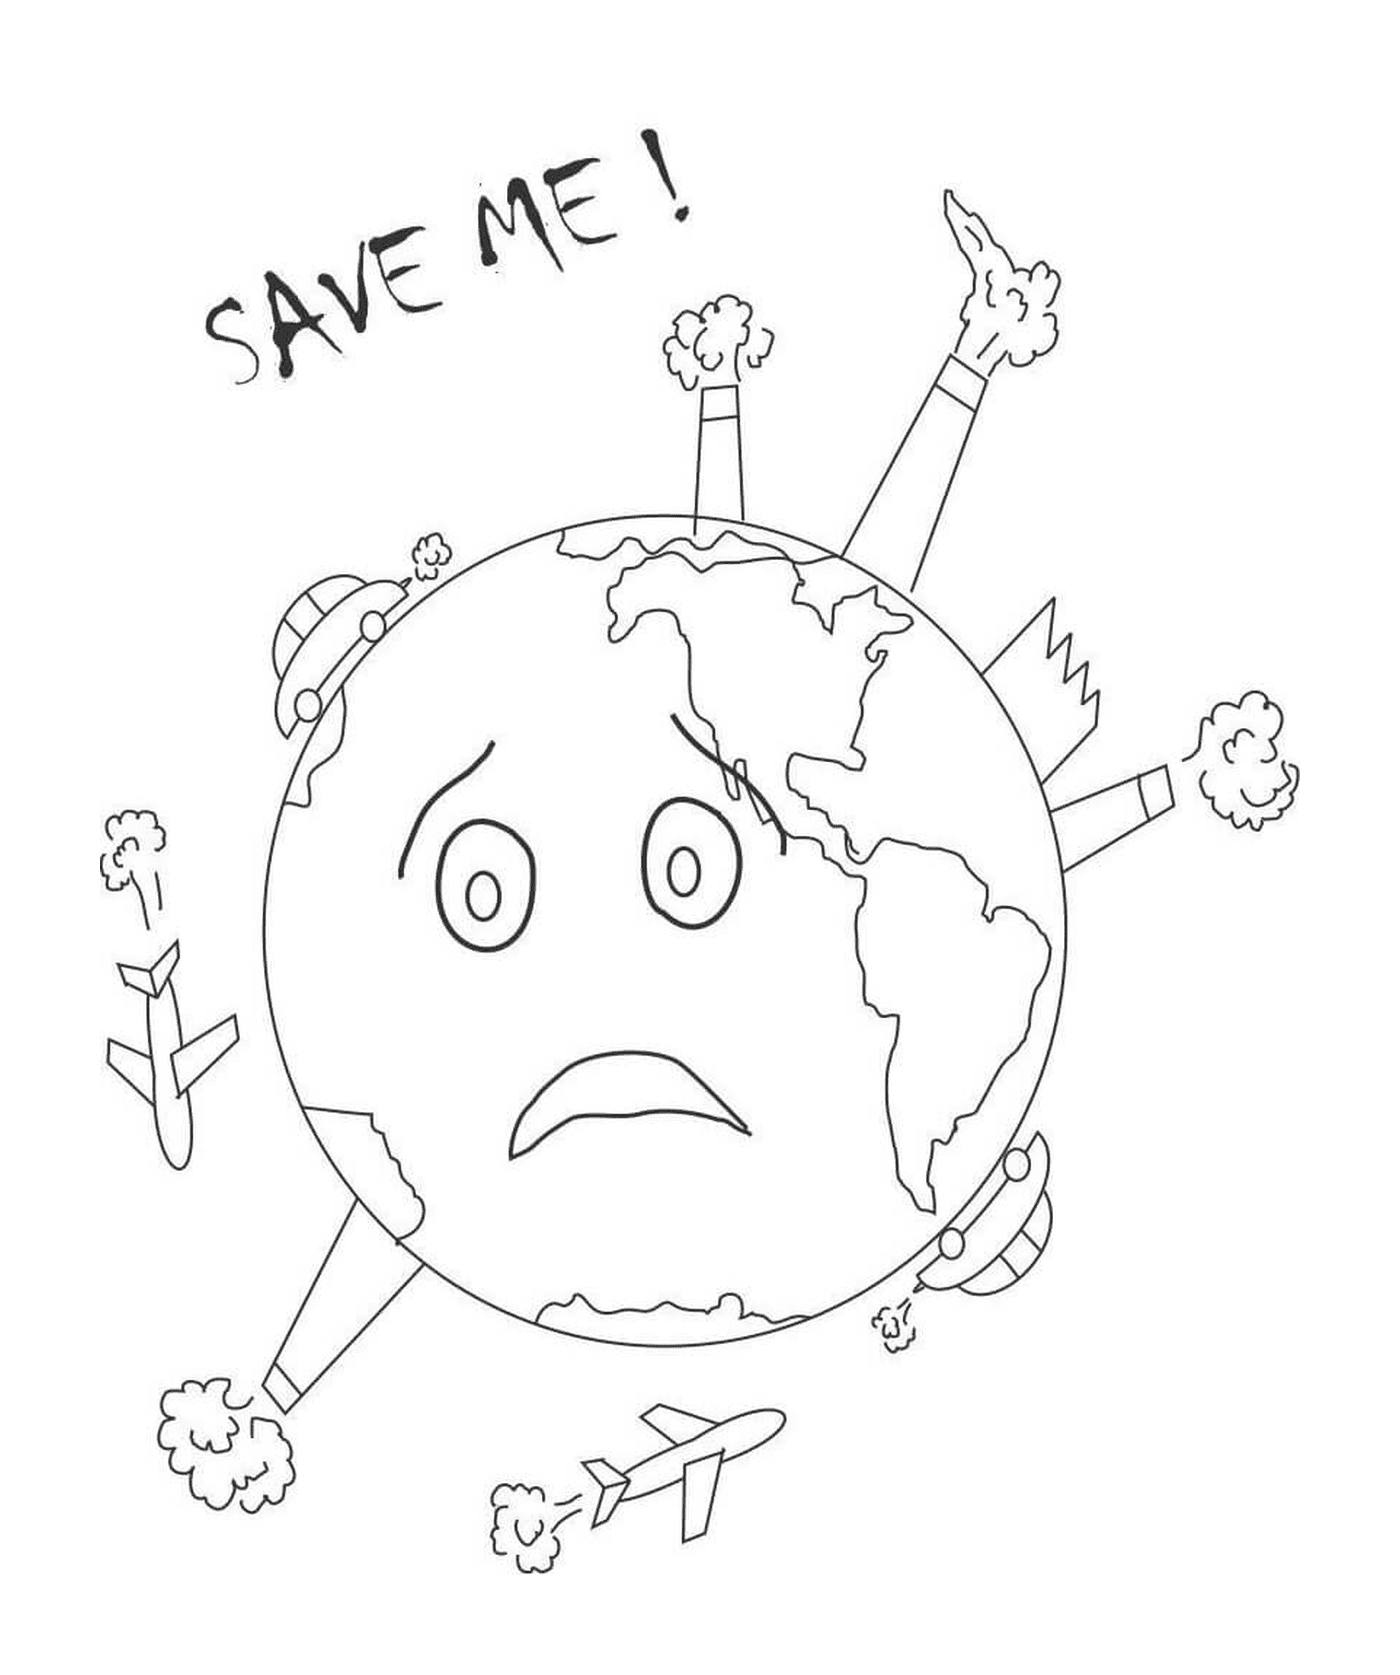  Save Earth from pollution 